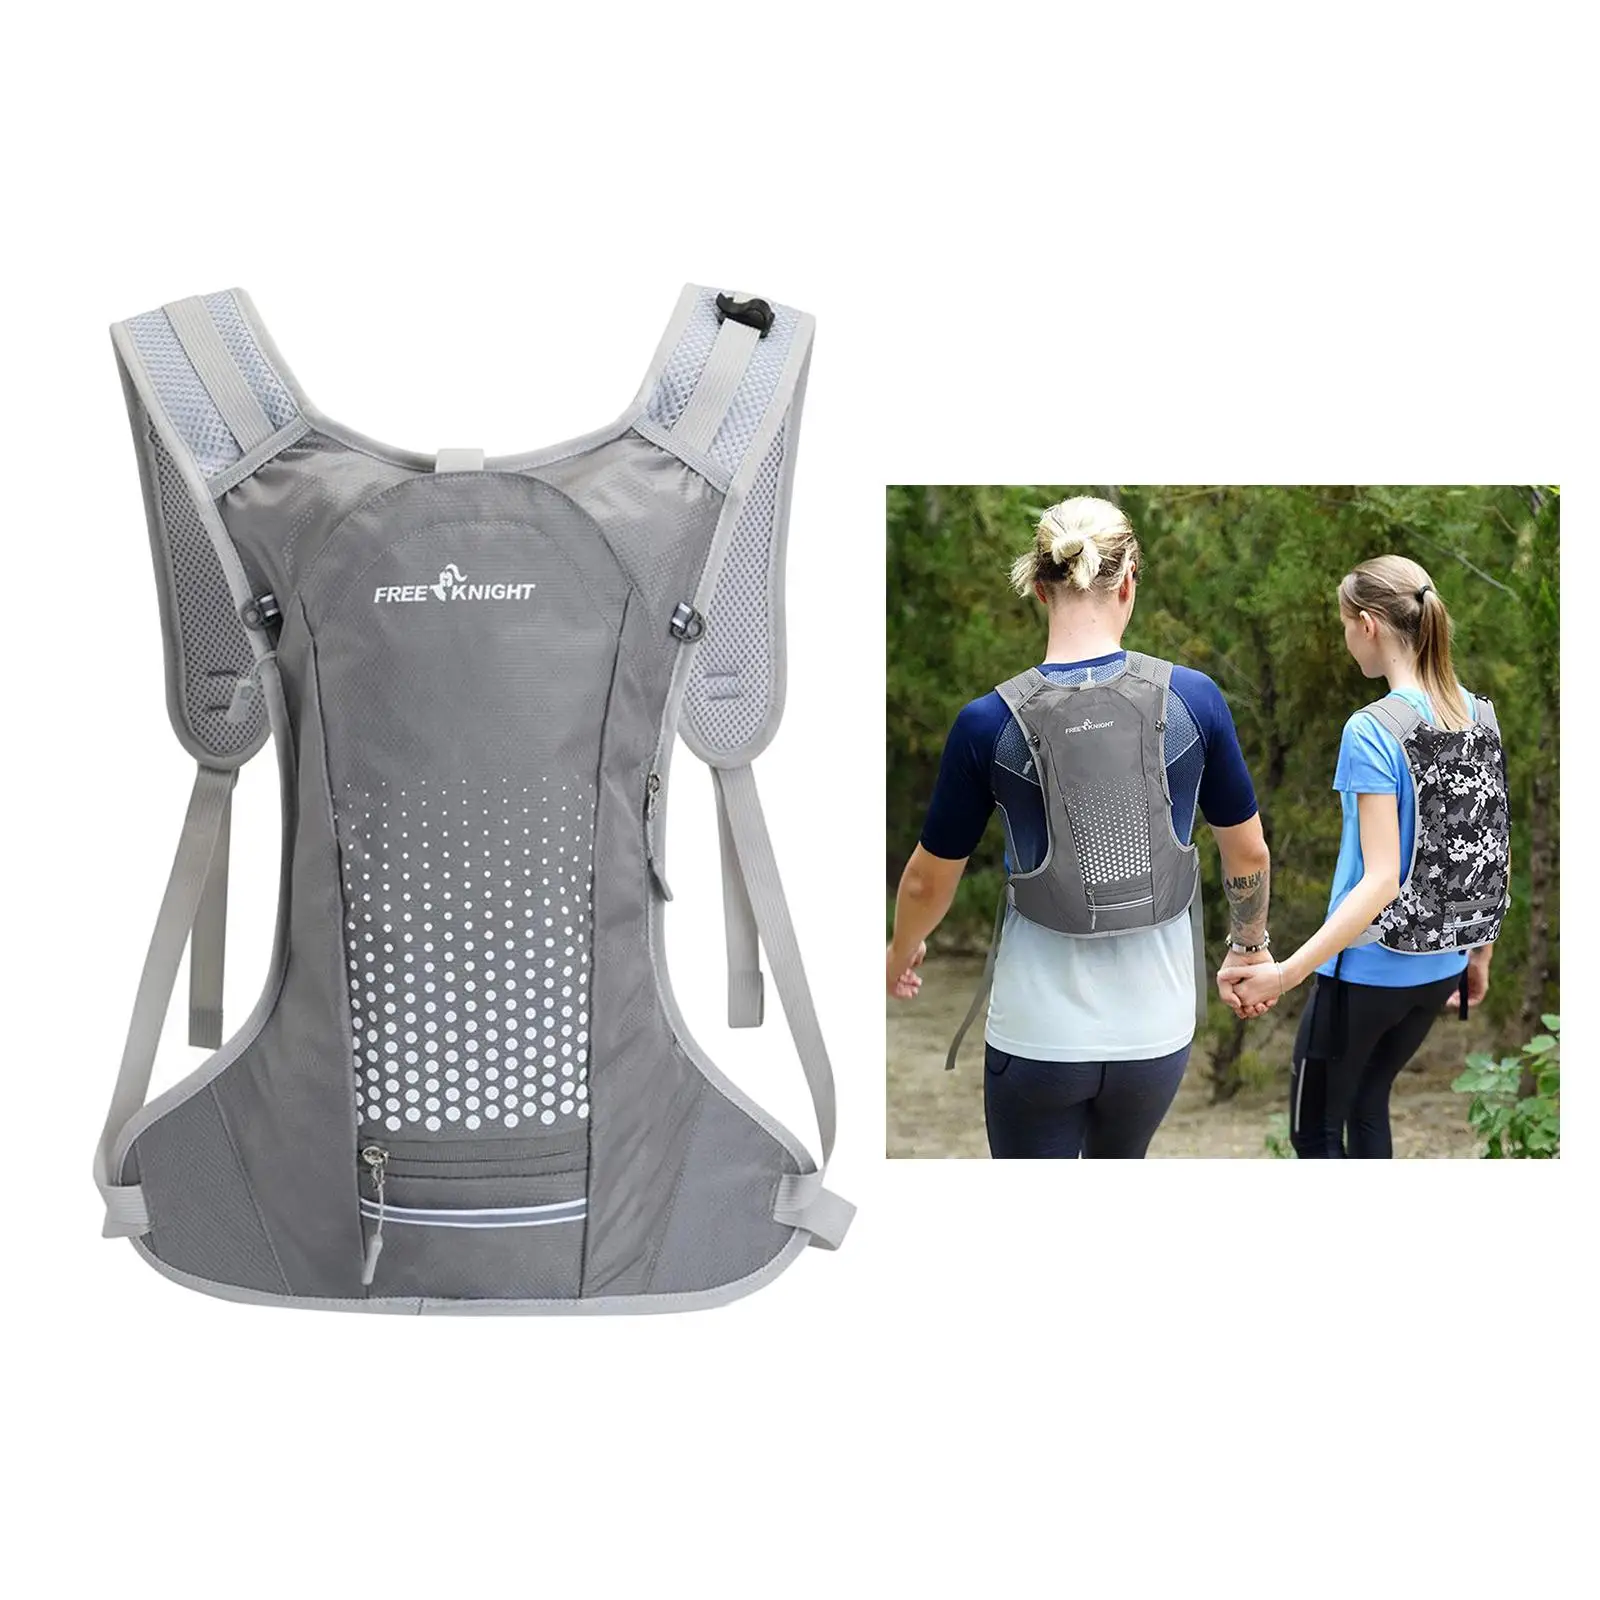 Small  Backpack L Water Bladder Bag for Men Women Kids, Fit Outdoor Gear for Hiking, Running, Cycling, Camping, Skiing